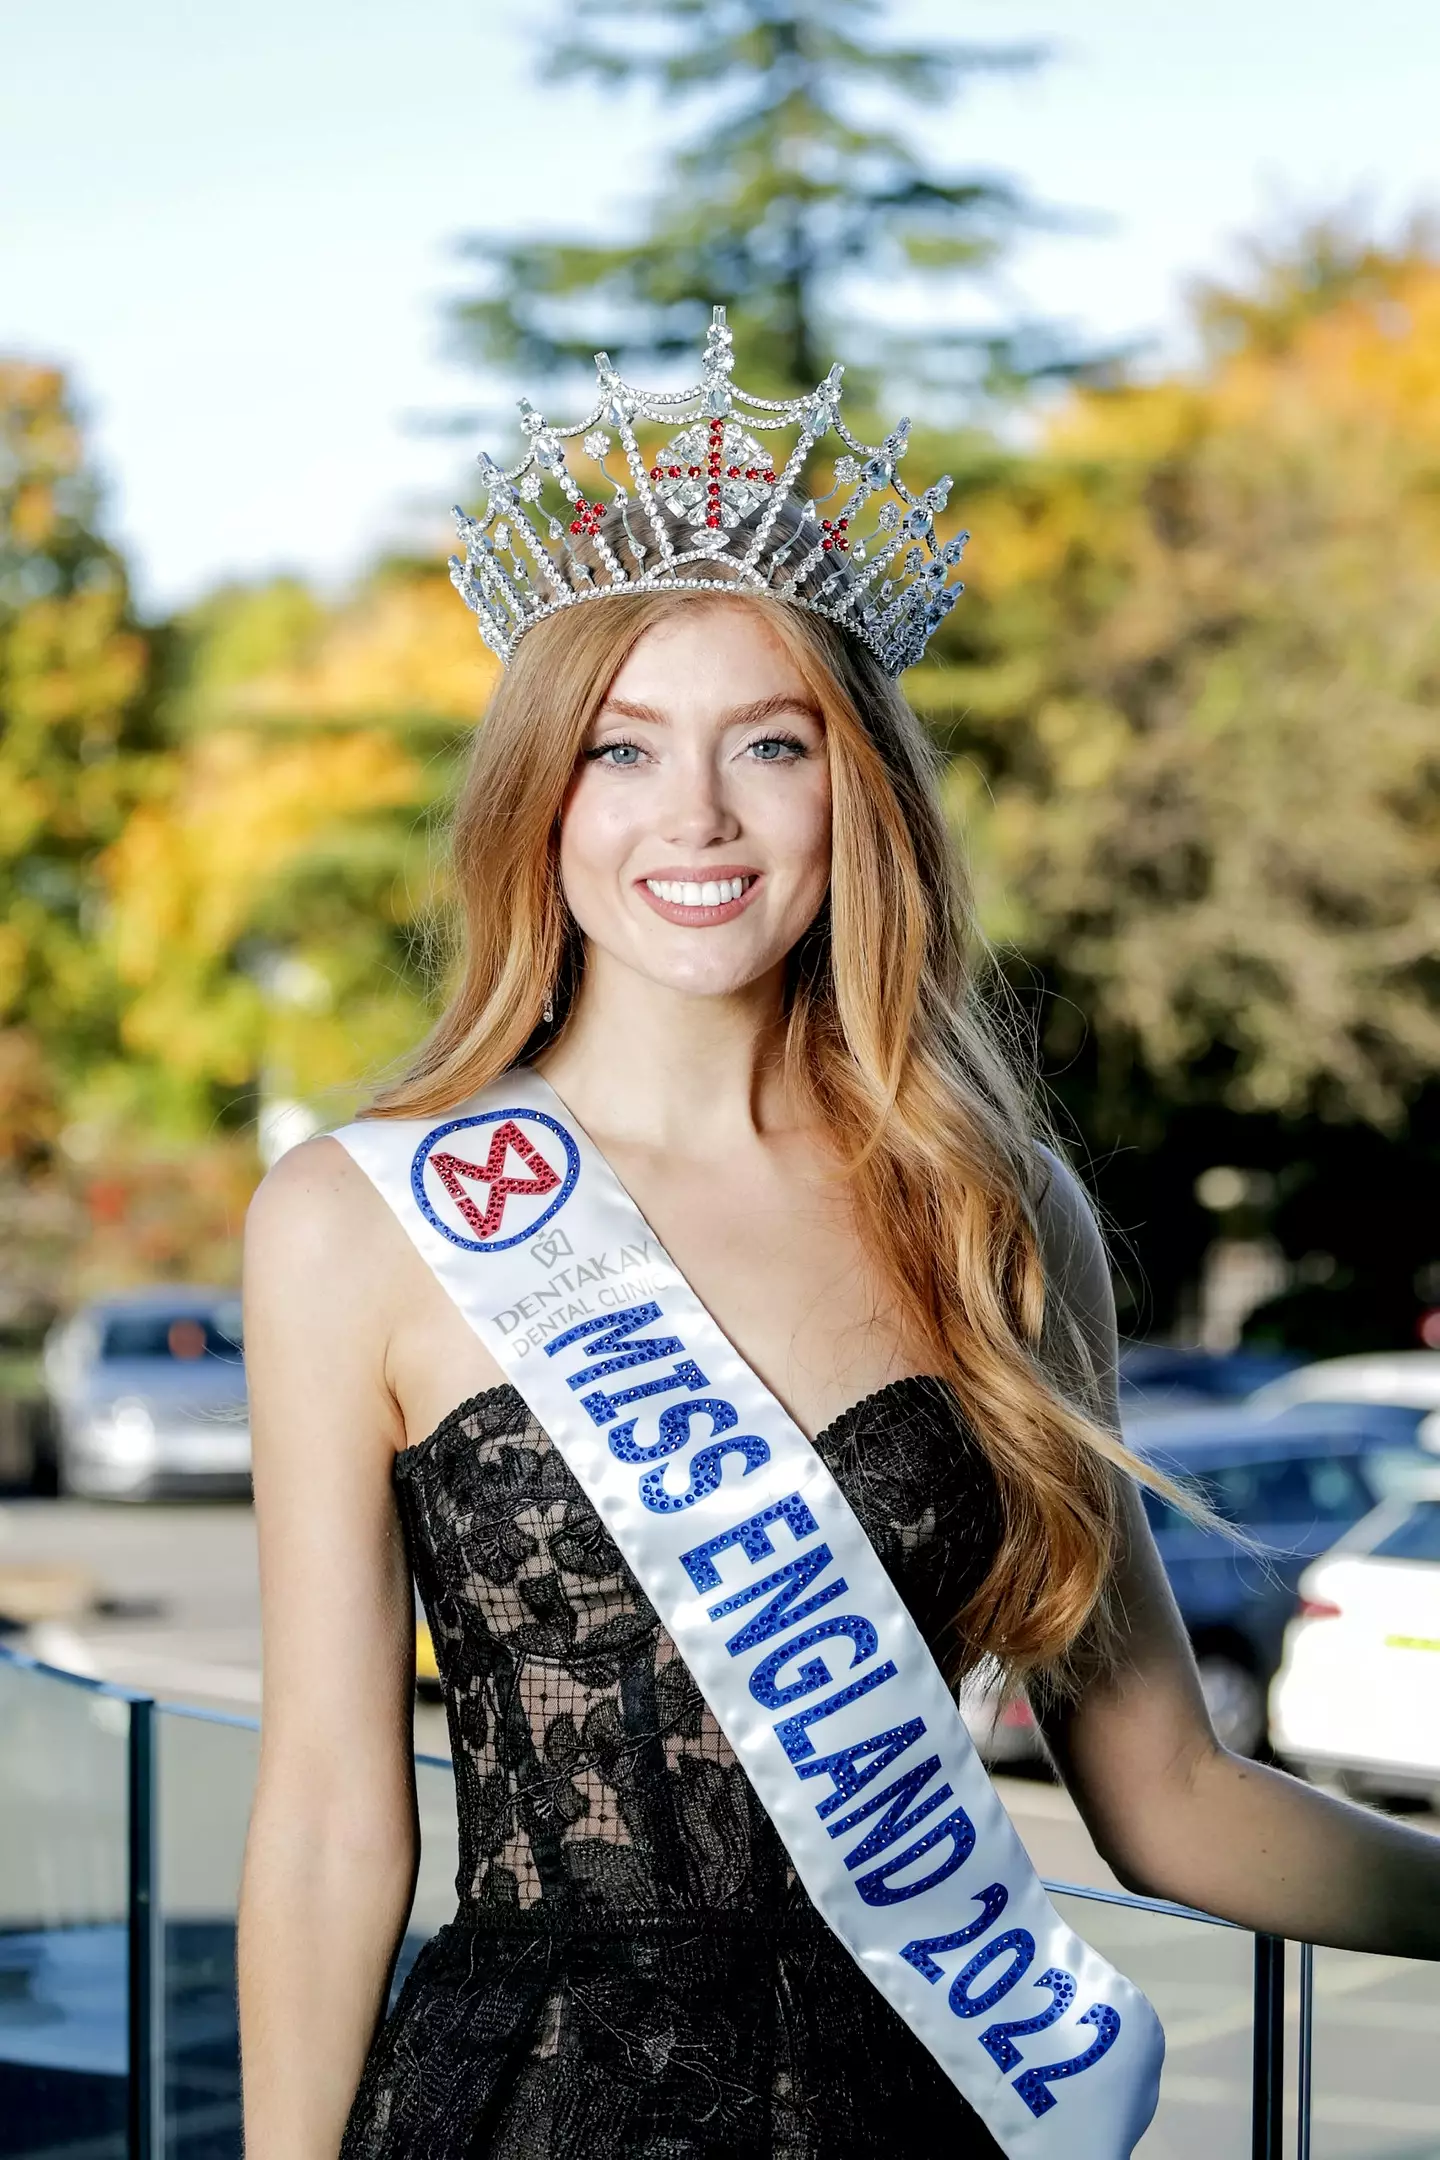 Jessica Gagen has been crowned as Miss England.